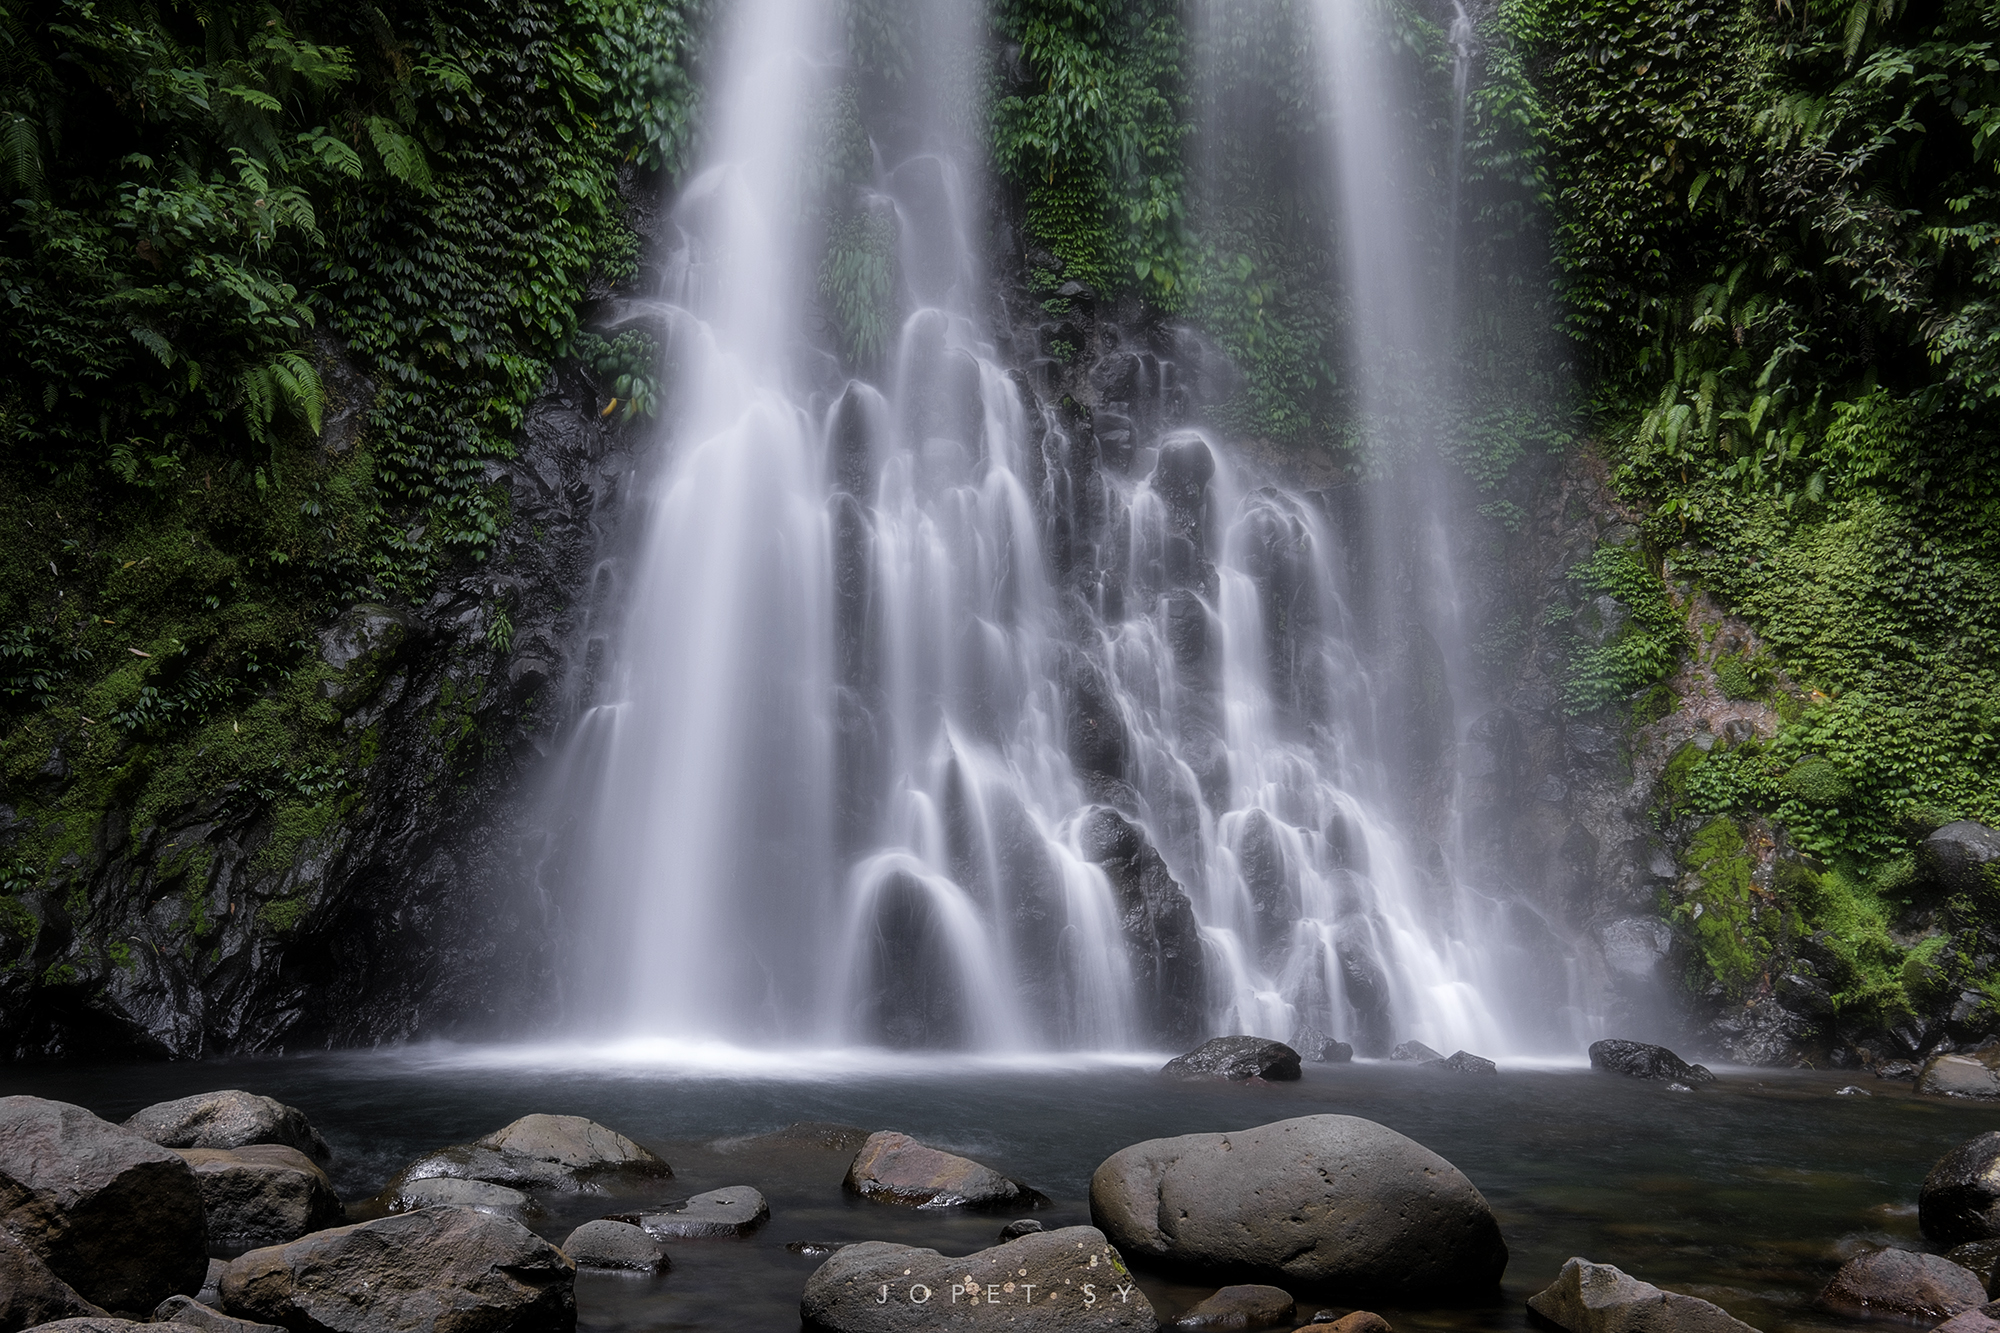 List of Best Waterfalls in the Philippines